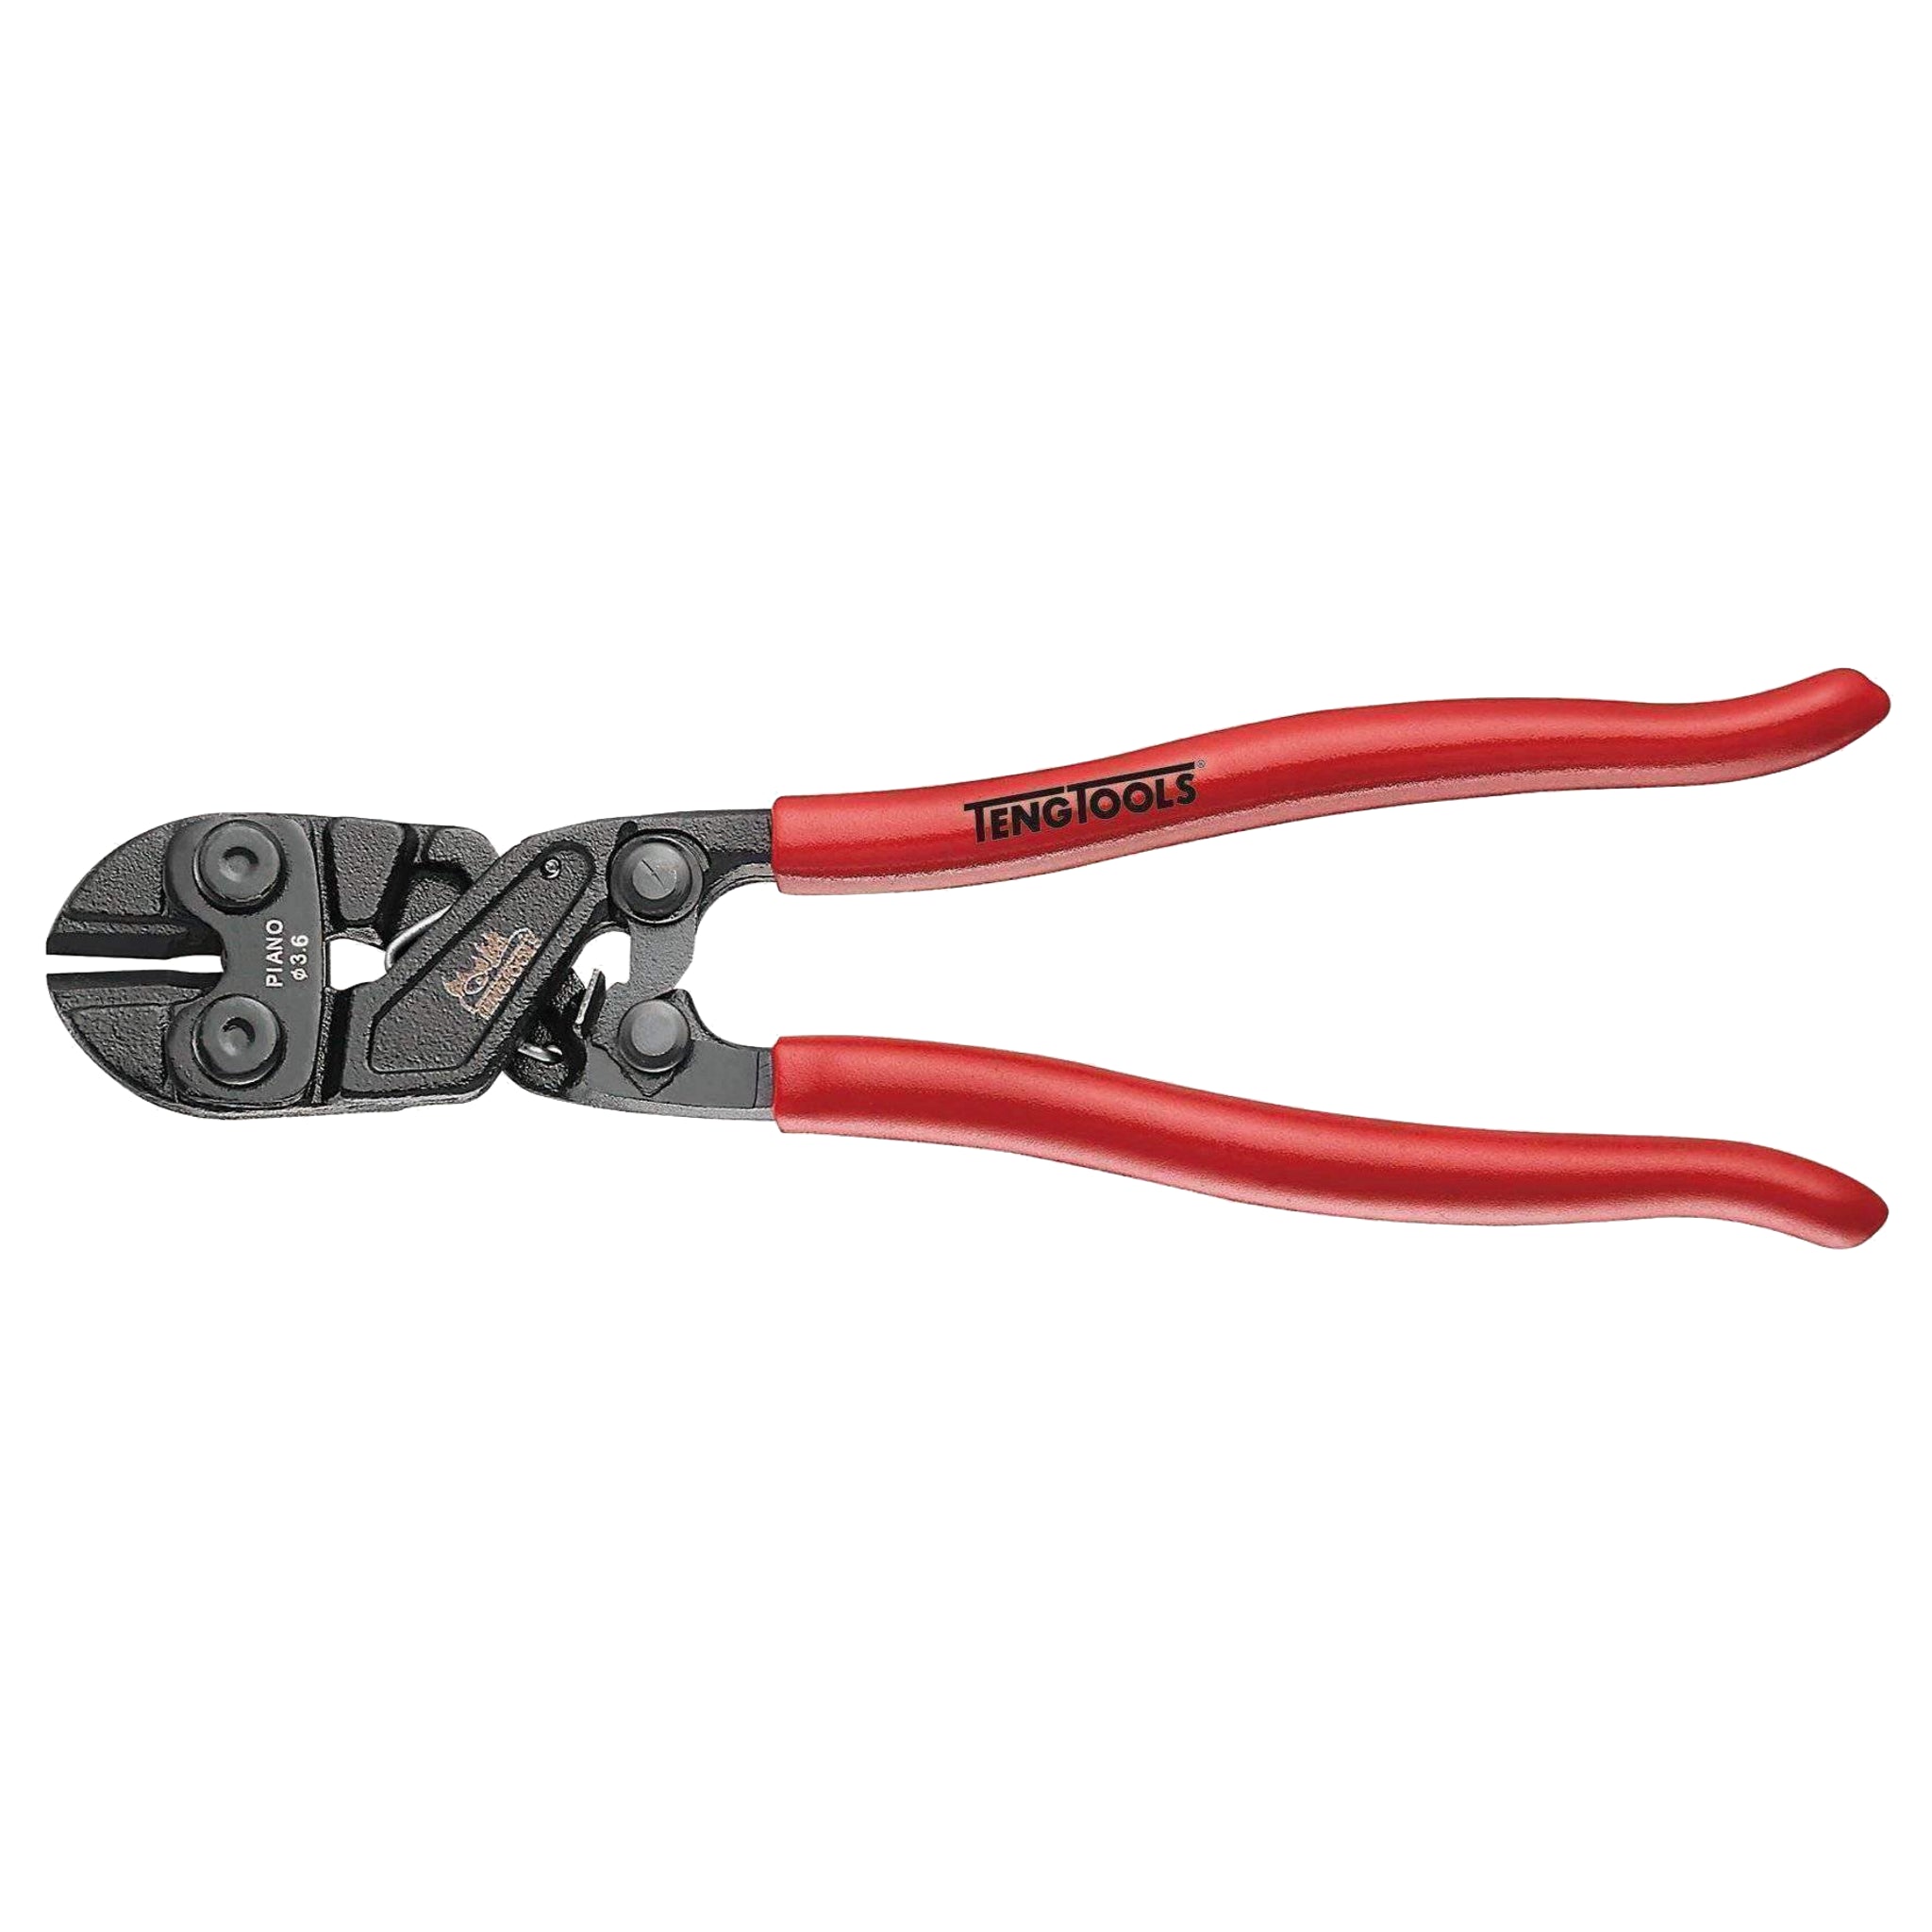 Teng Tools Bolt Cutters With Dipped Handle 8 To 36 Inches - 30 Inch